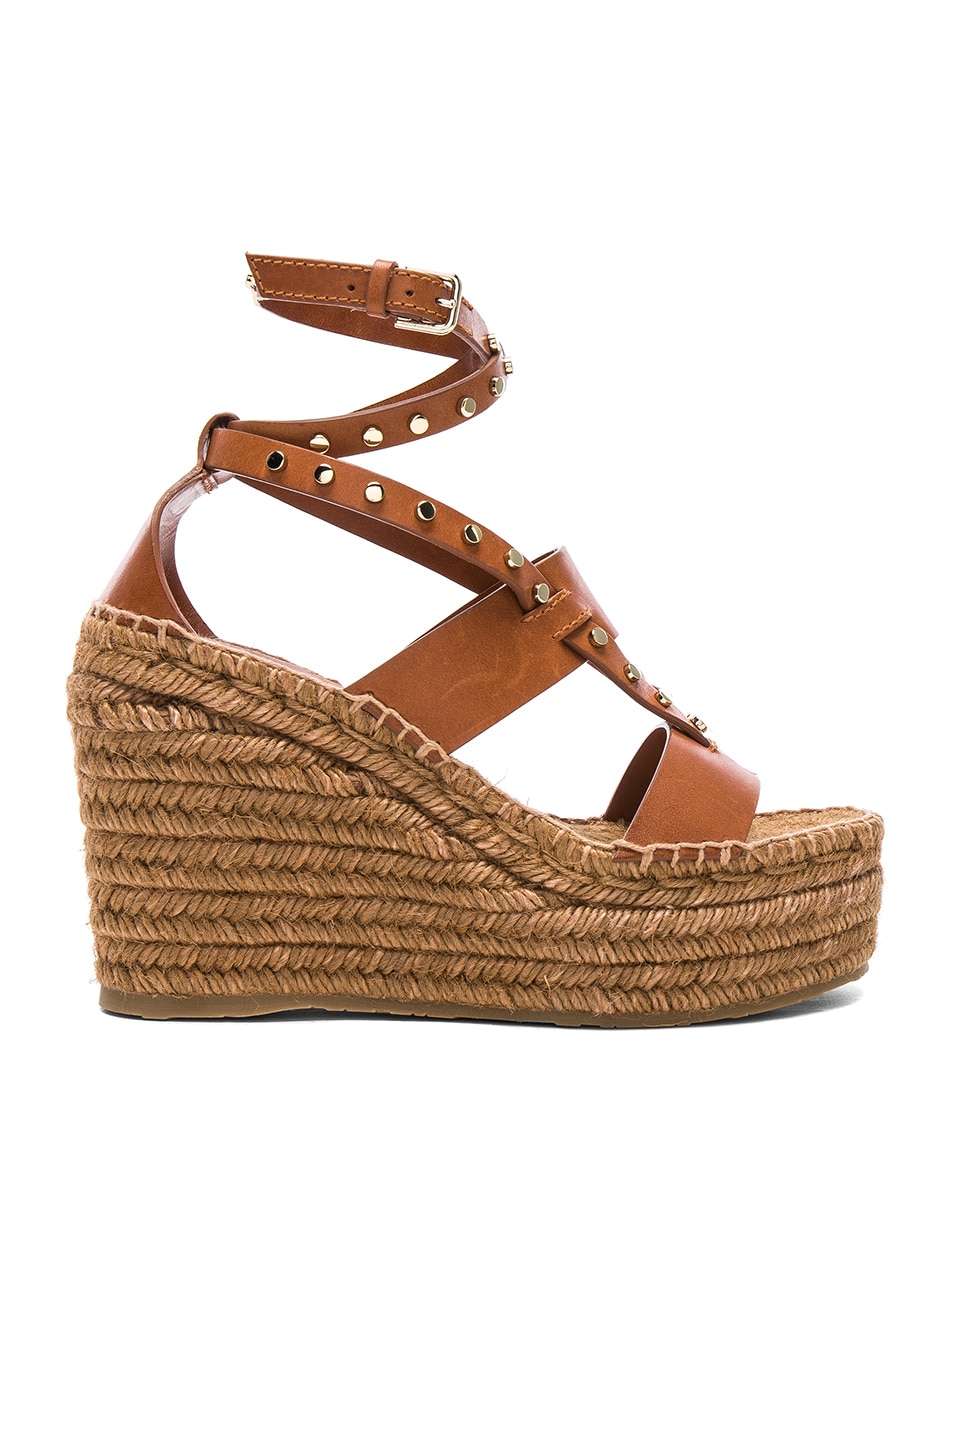 Image 1 of Jimmy Choo Danica 110 Leather Wedges in Tan & Gold